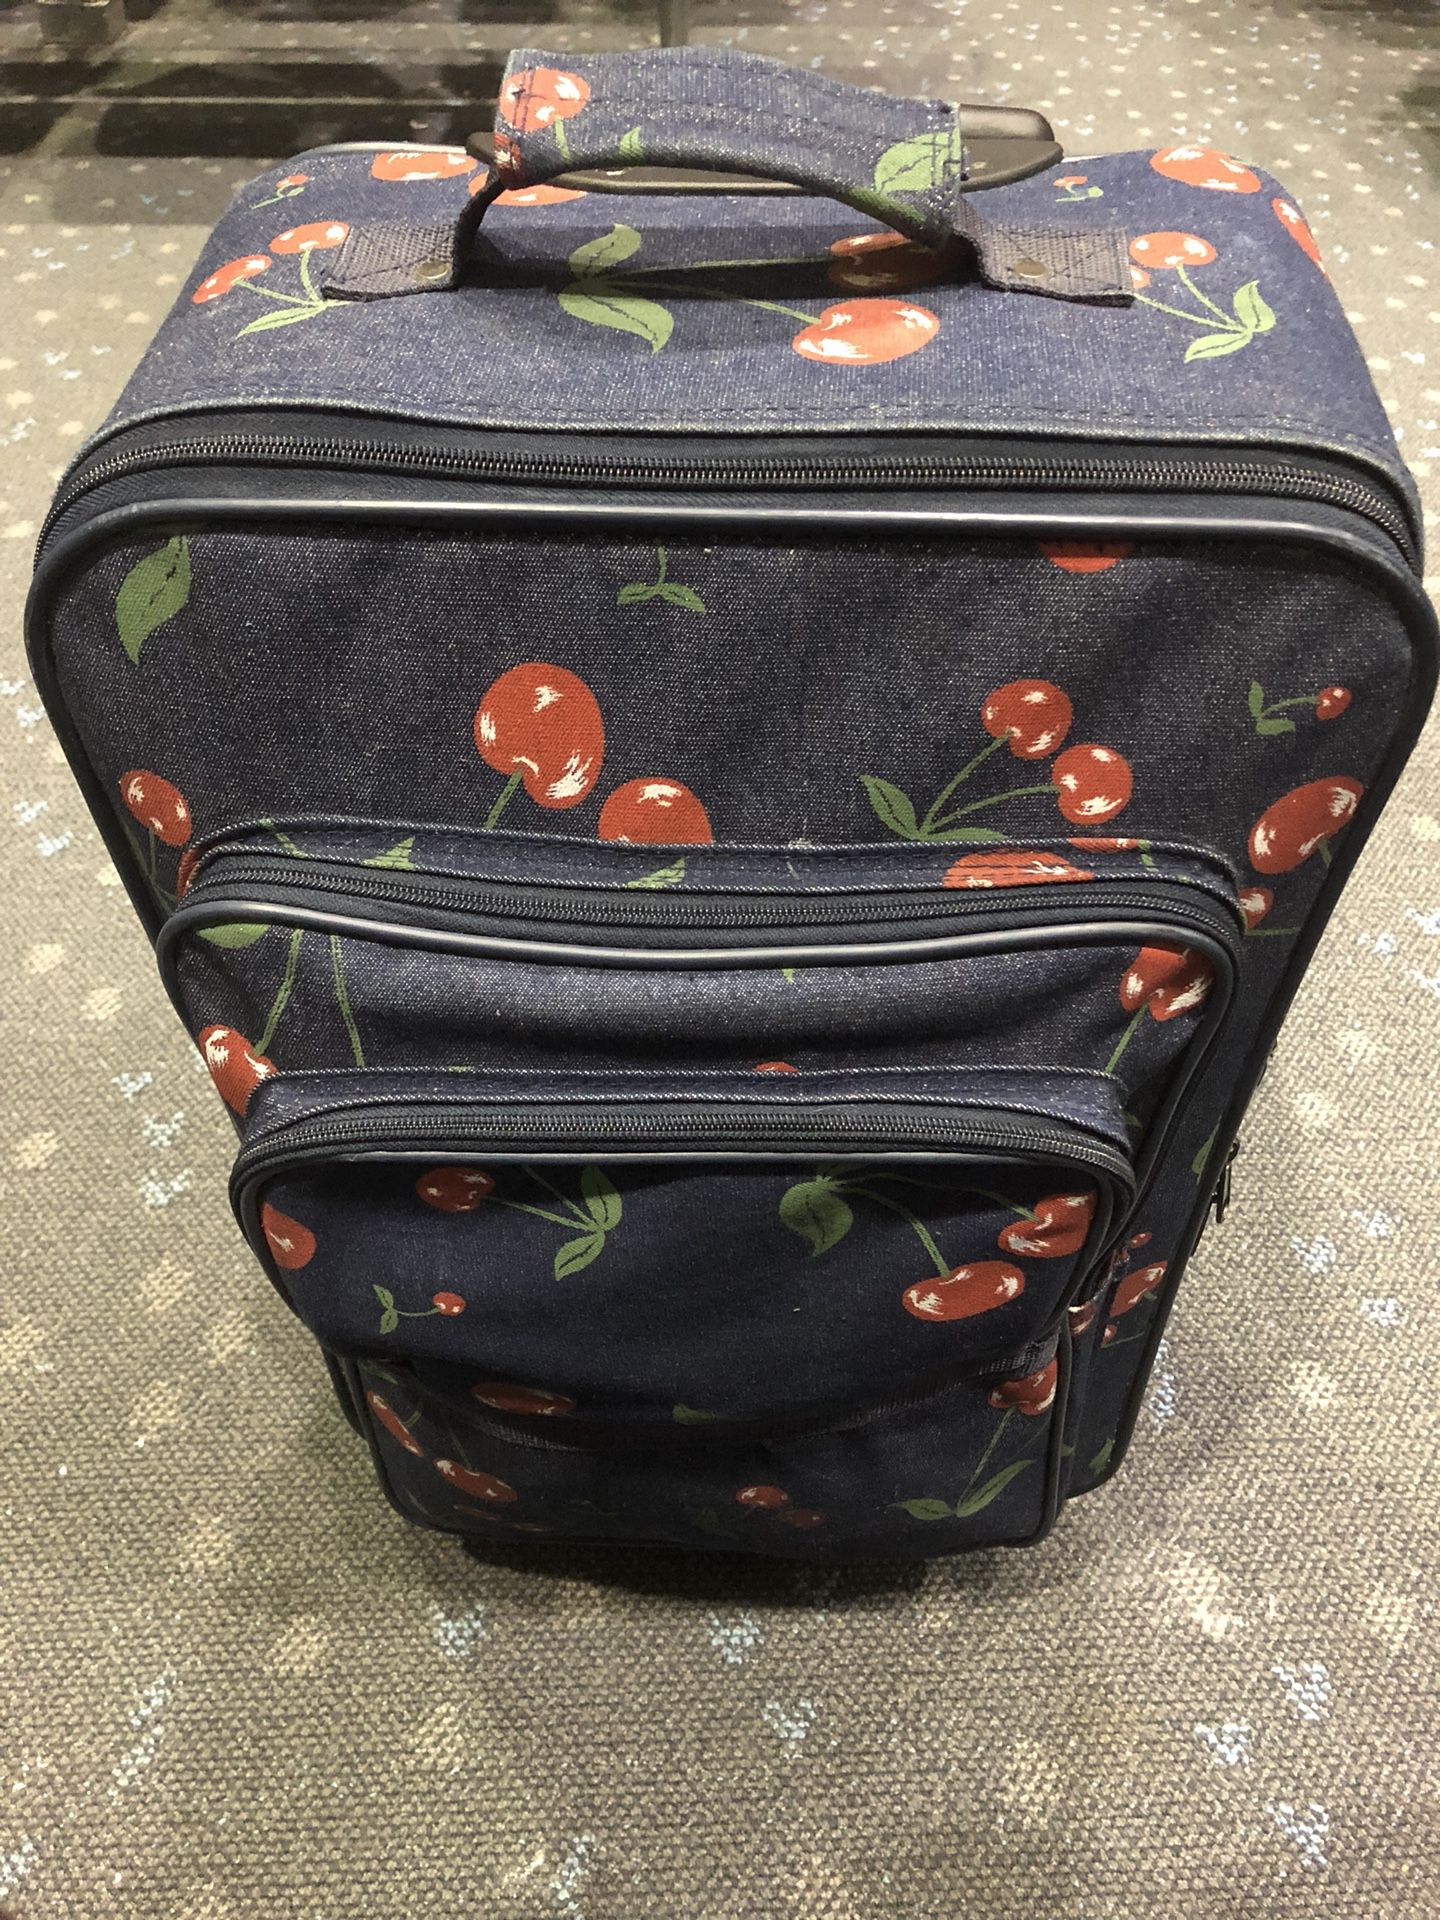 Two piece designer luggage set for Sale in Irvine, CA - OfferUp